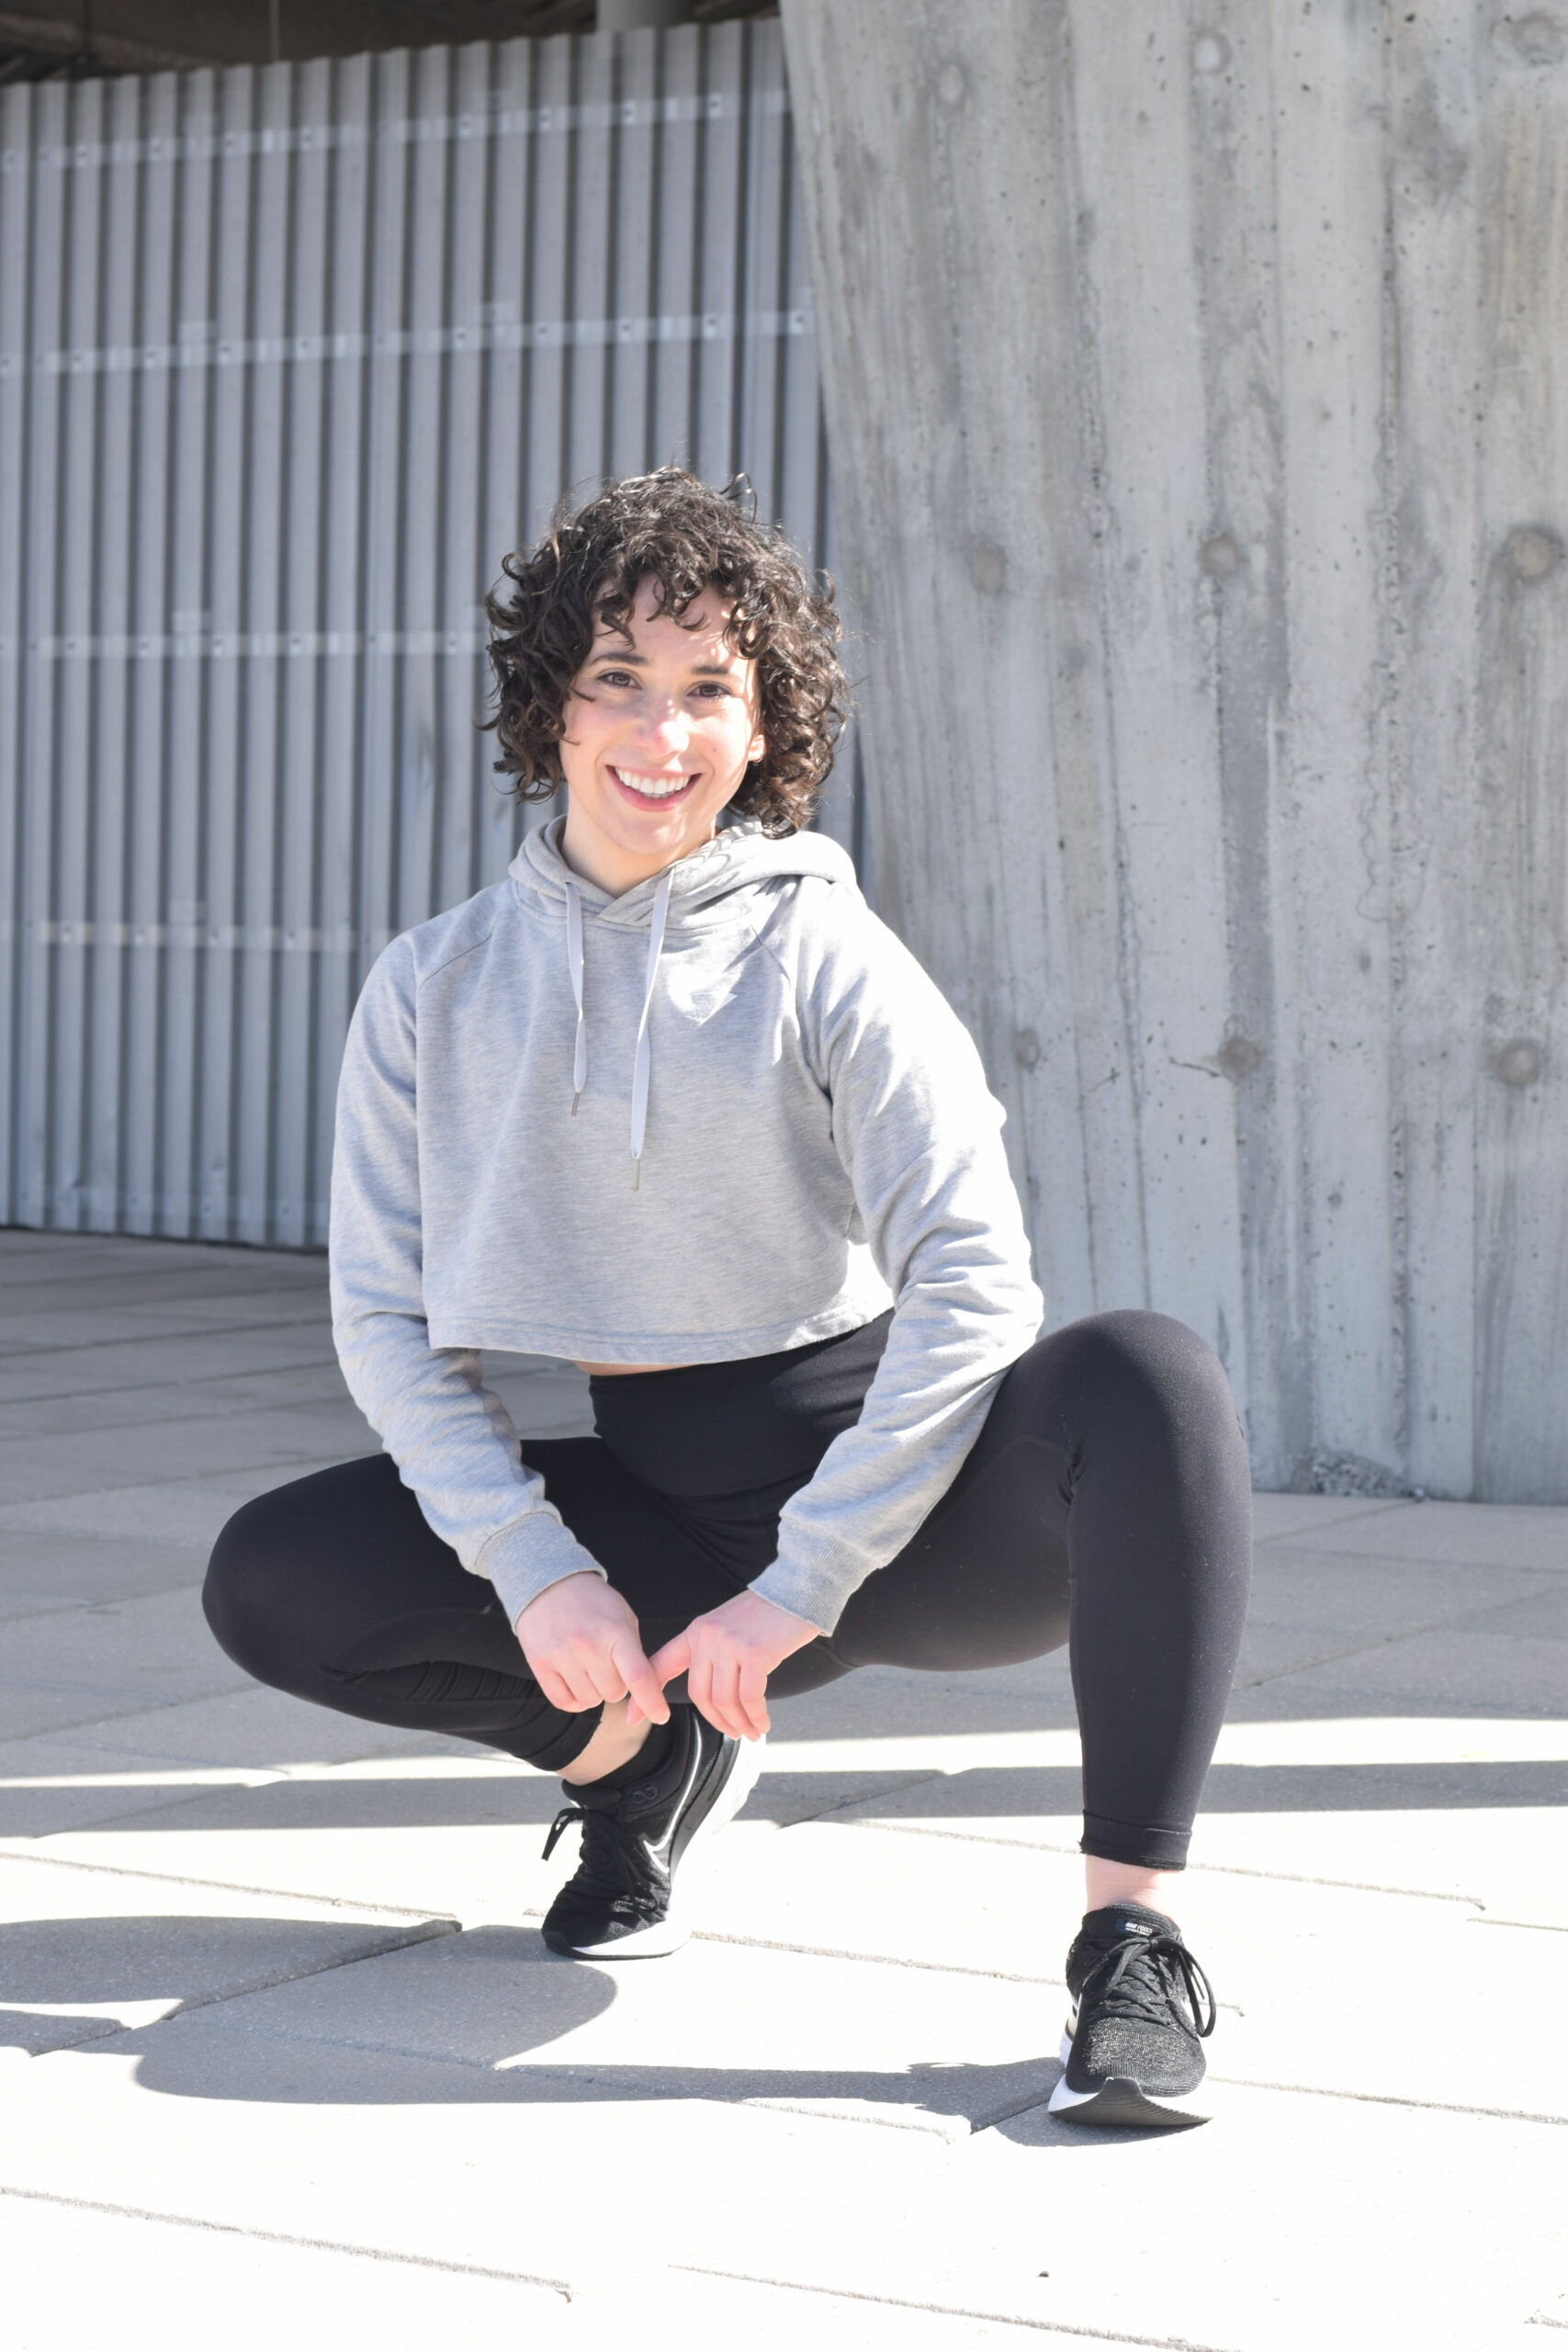 Woman crouching and smiling outdoors in team athletic wear.